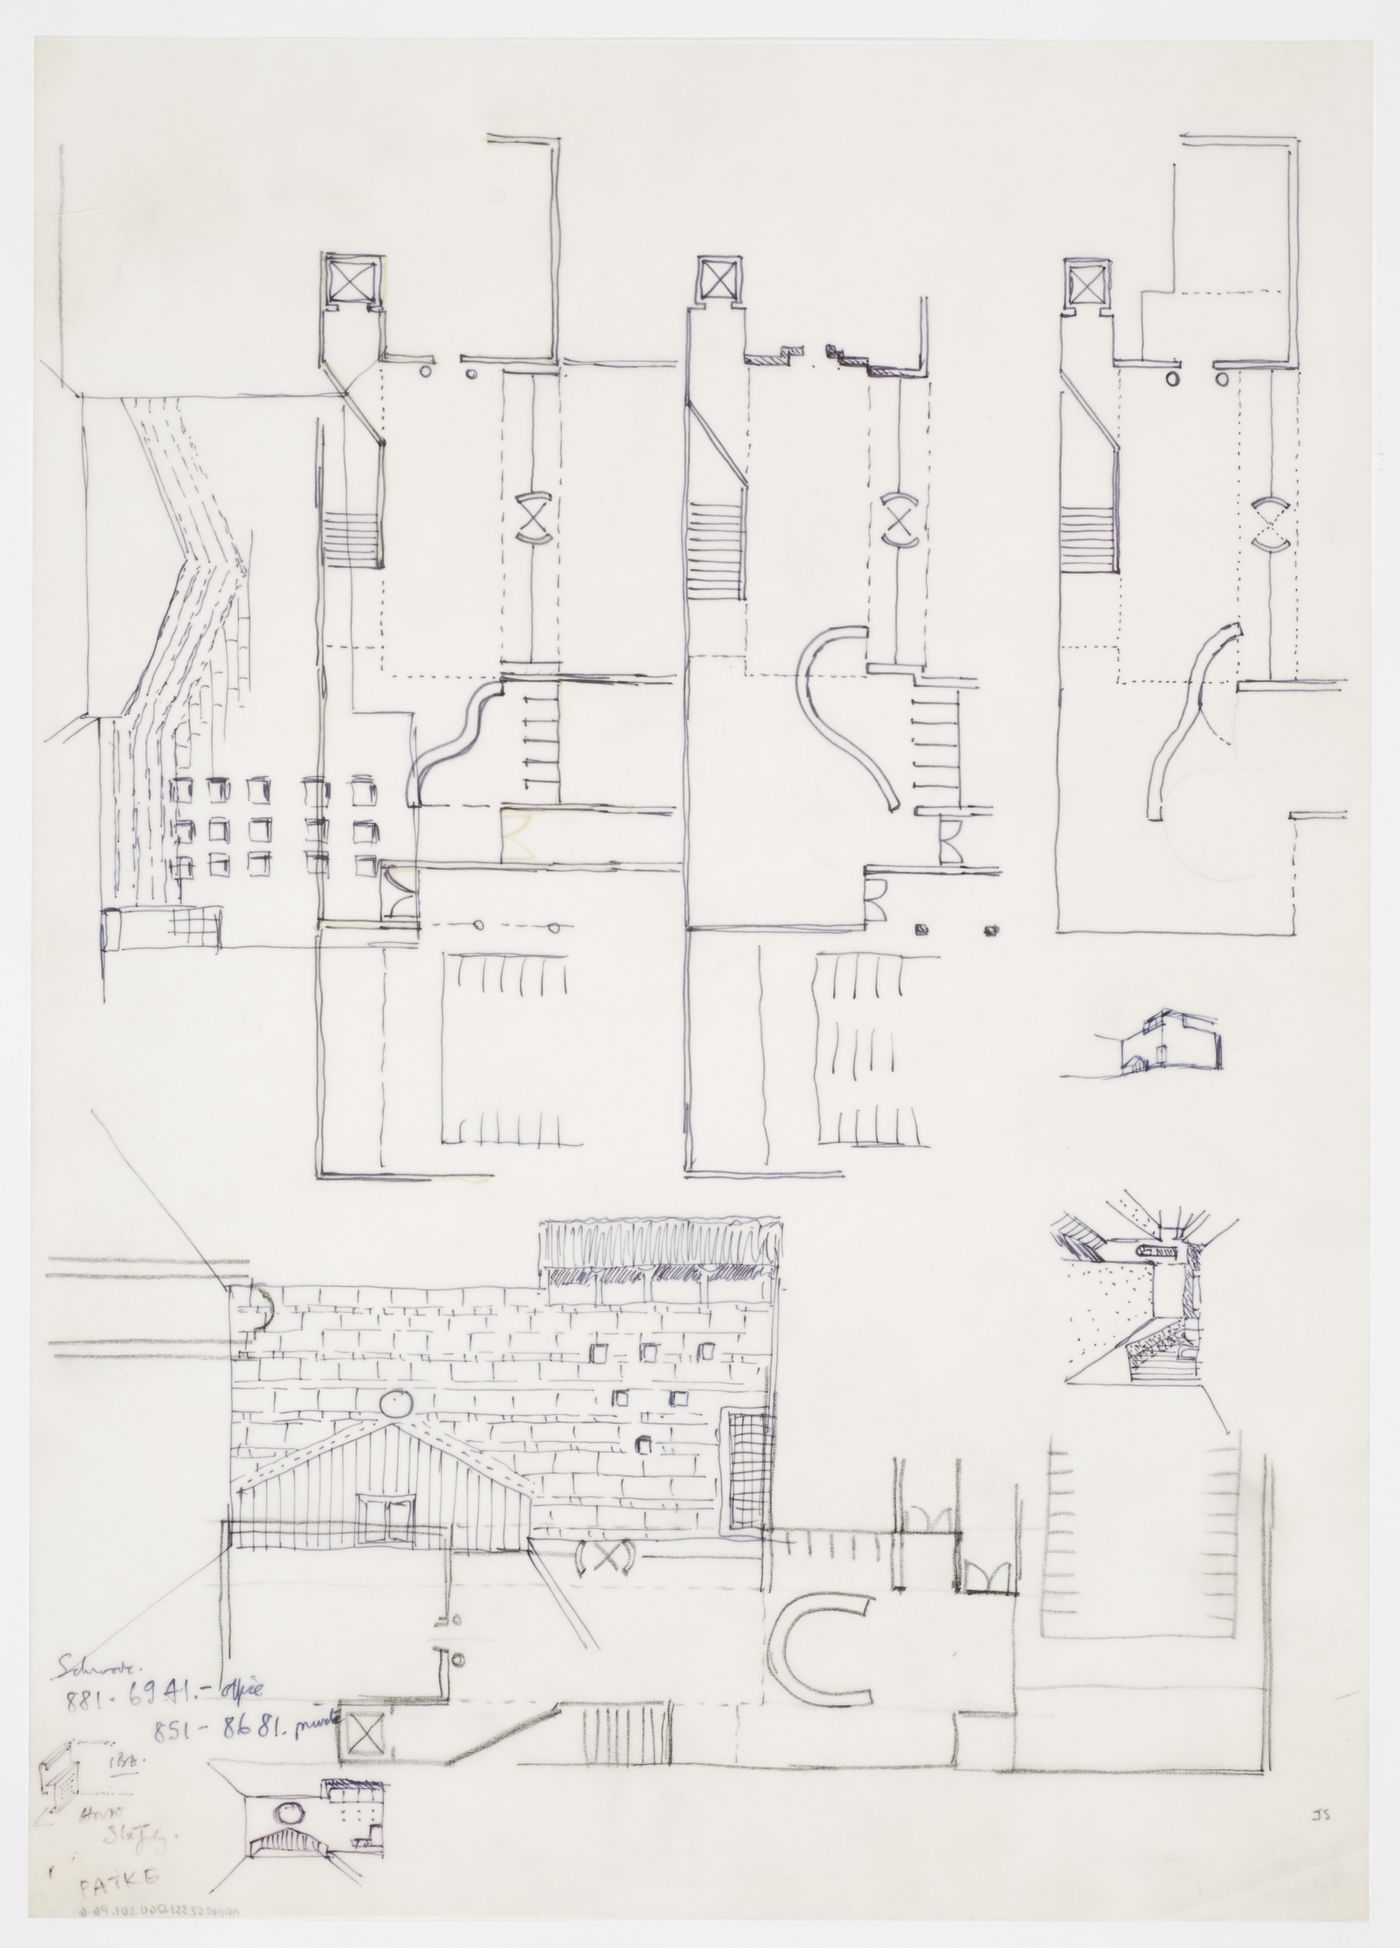 Clore Gallery, London, England: plans and elevations